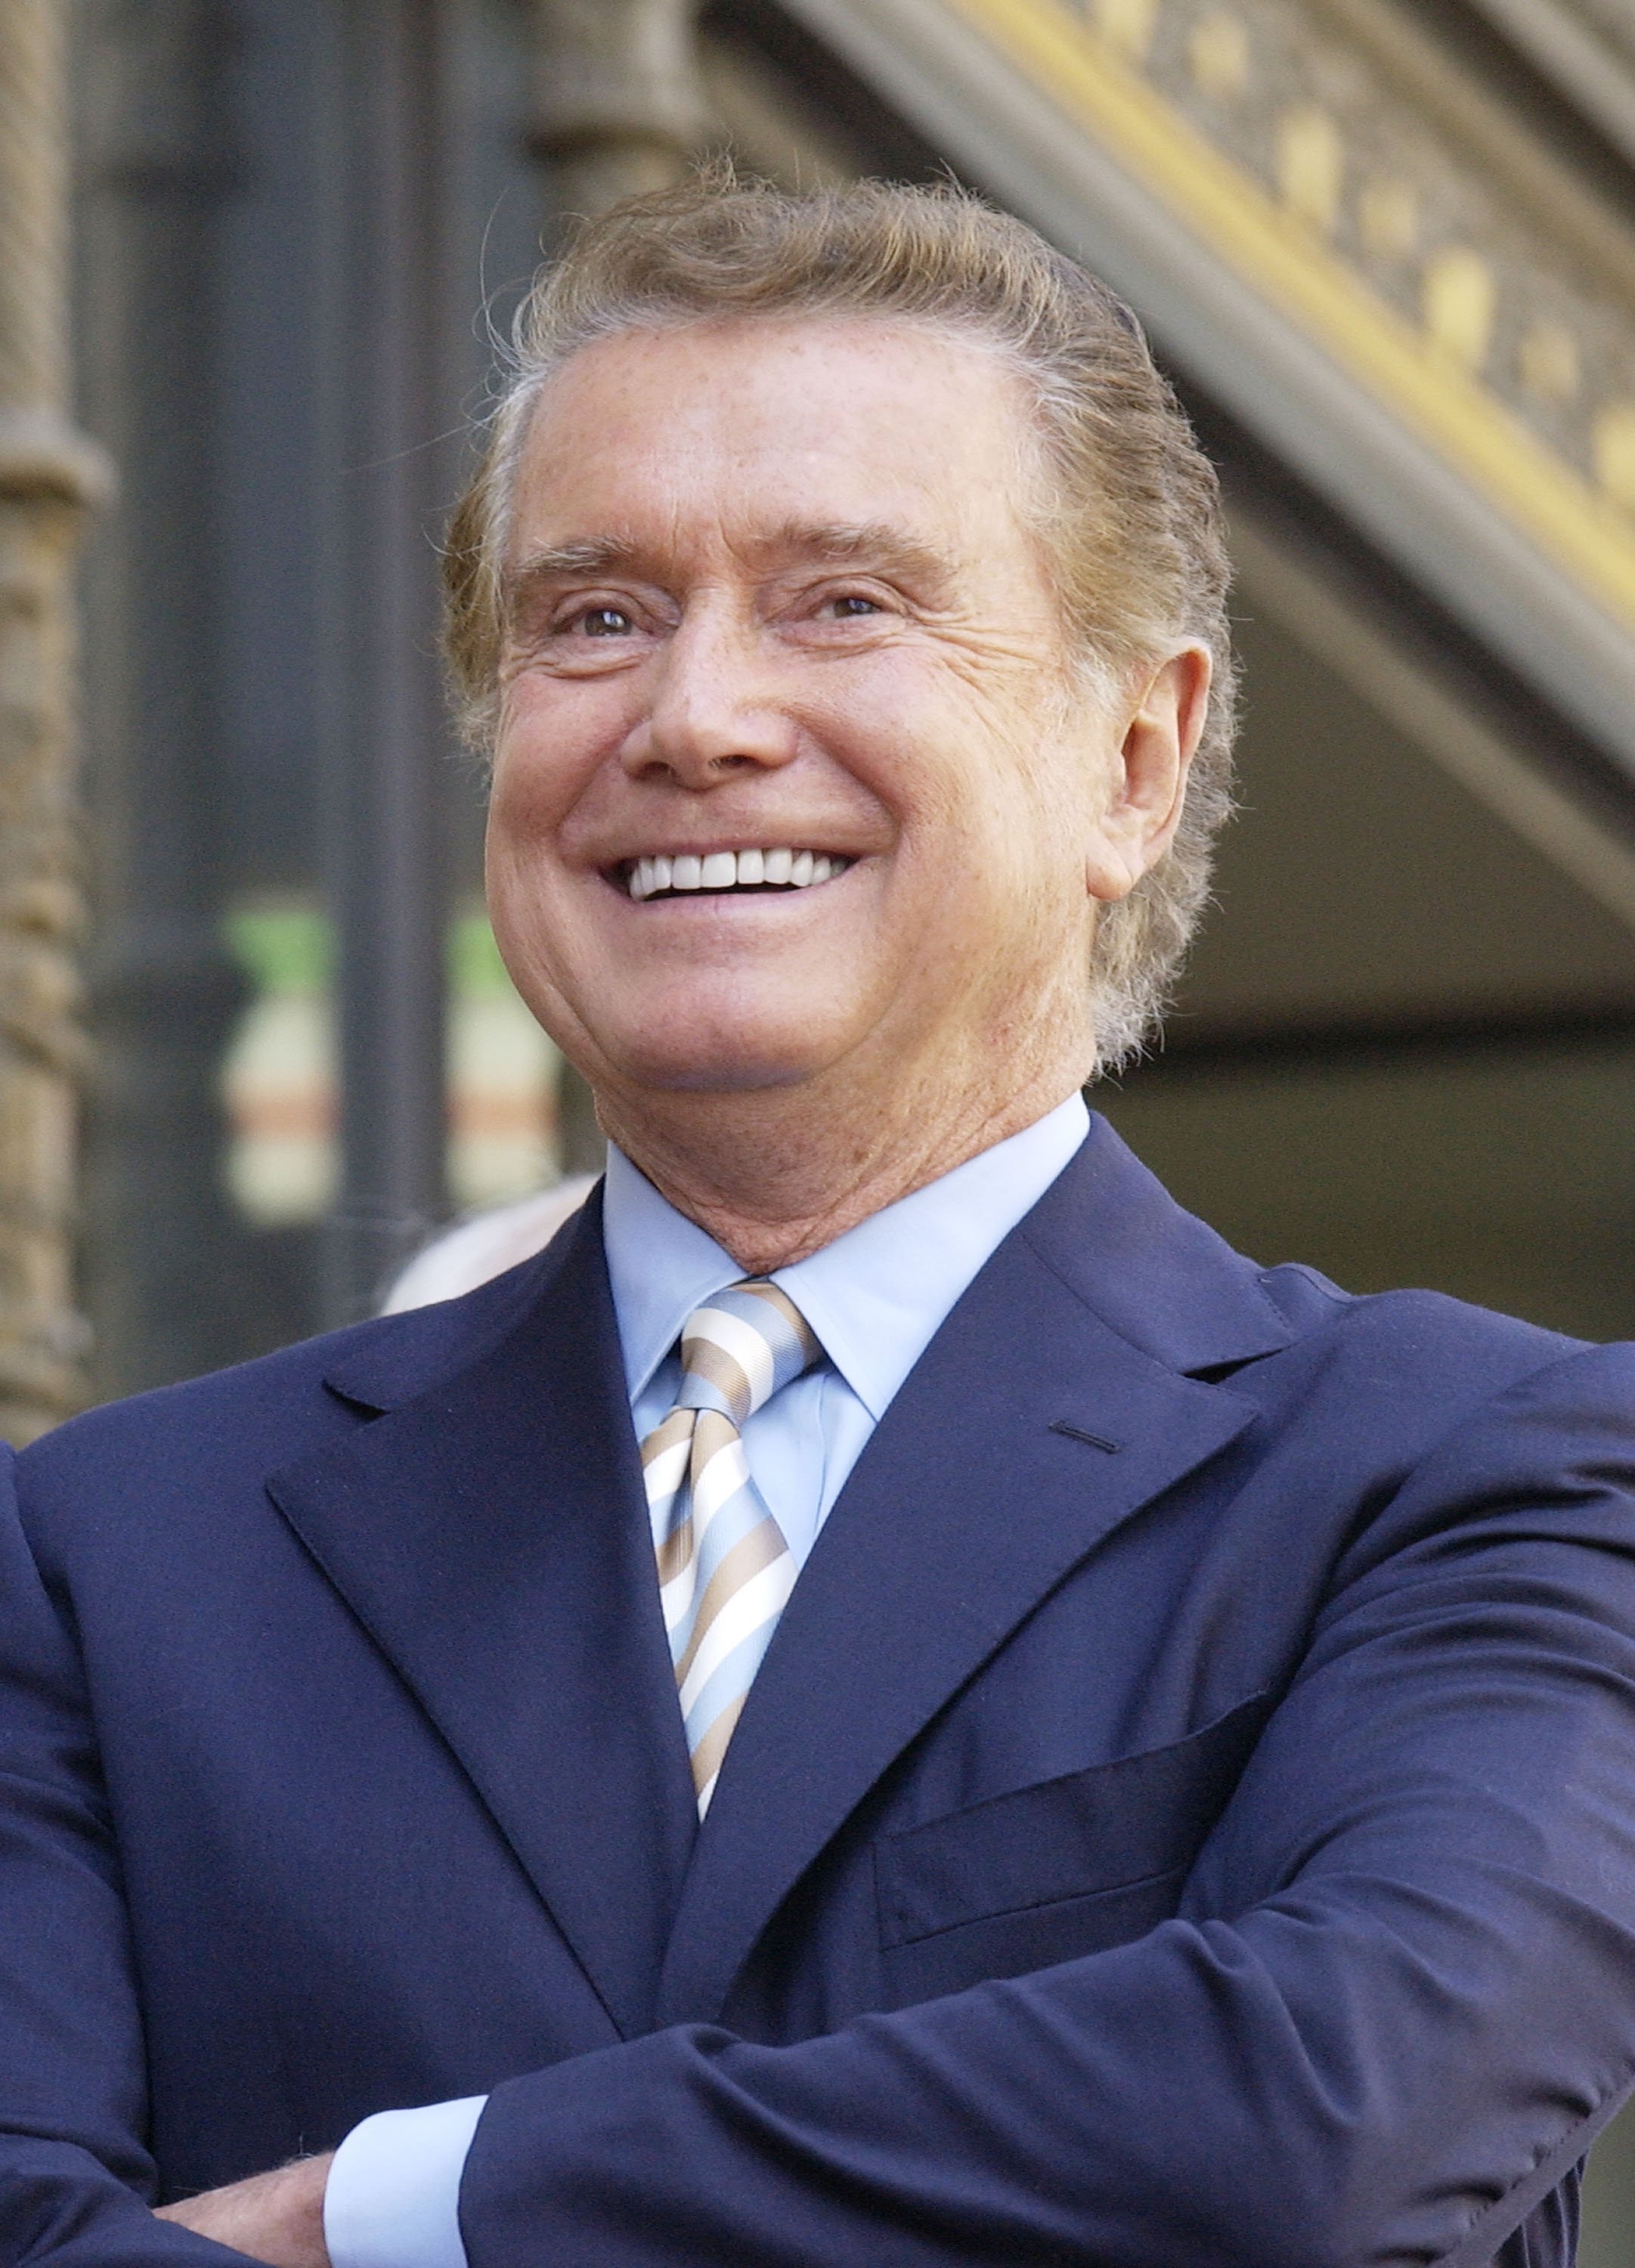 Photo of Regis Philbin after he received a Star on the Hollywood Walk of Fame on April 10, 2003 | Source: Getty Images